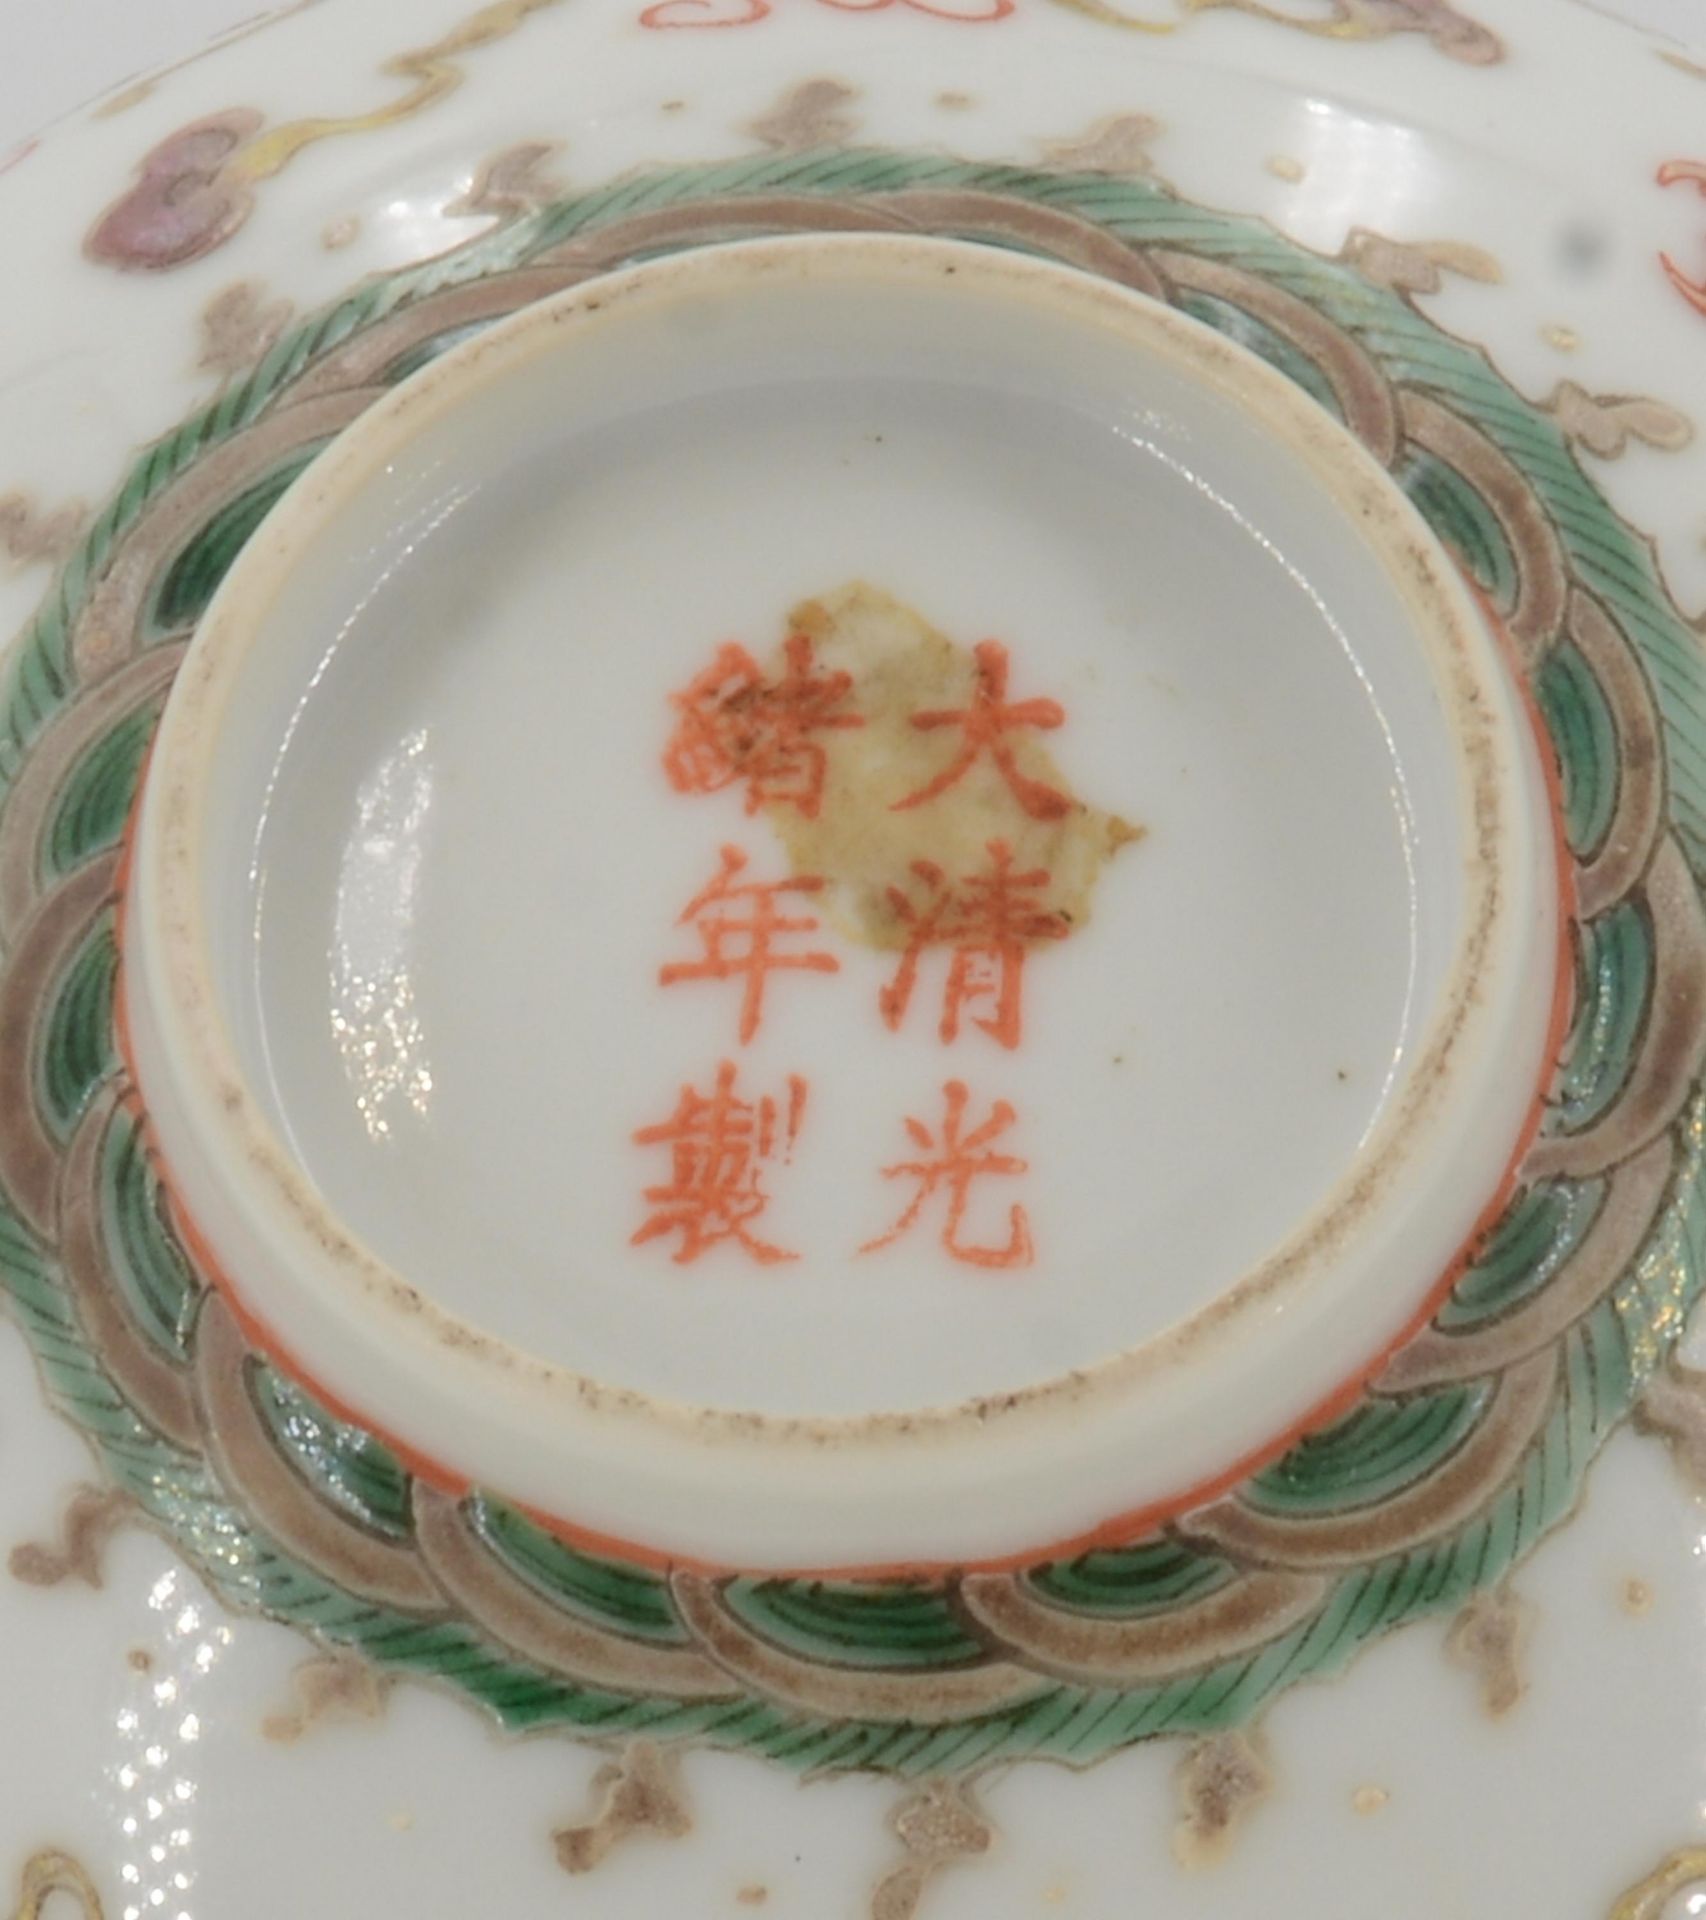 LOT OF SIX PORCELAIN PIECES. Origin: China. Dynasty: Qing dynasty and later. Date: 18th-20th c. - Bild 5 aus 9